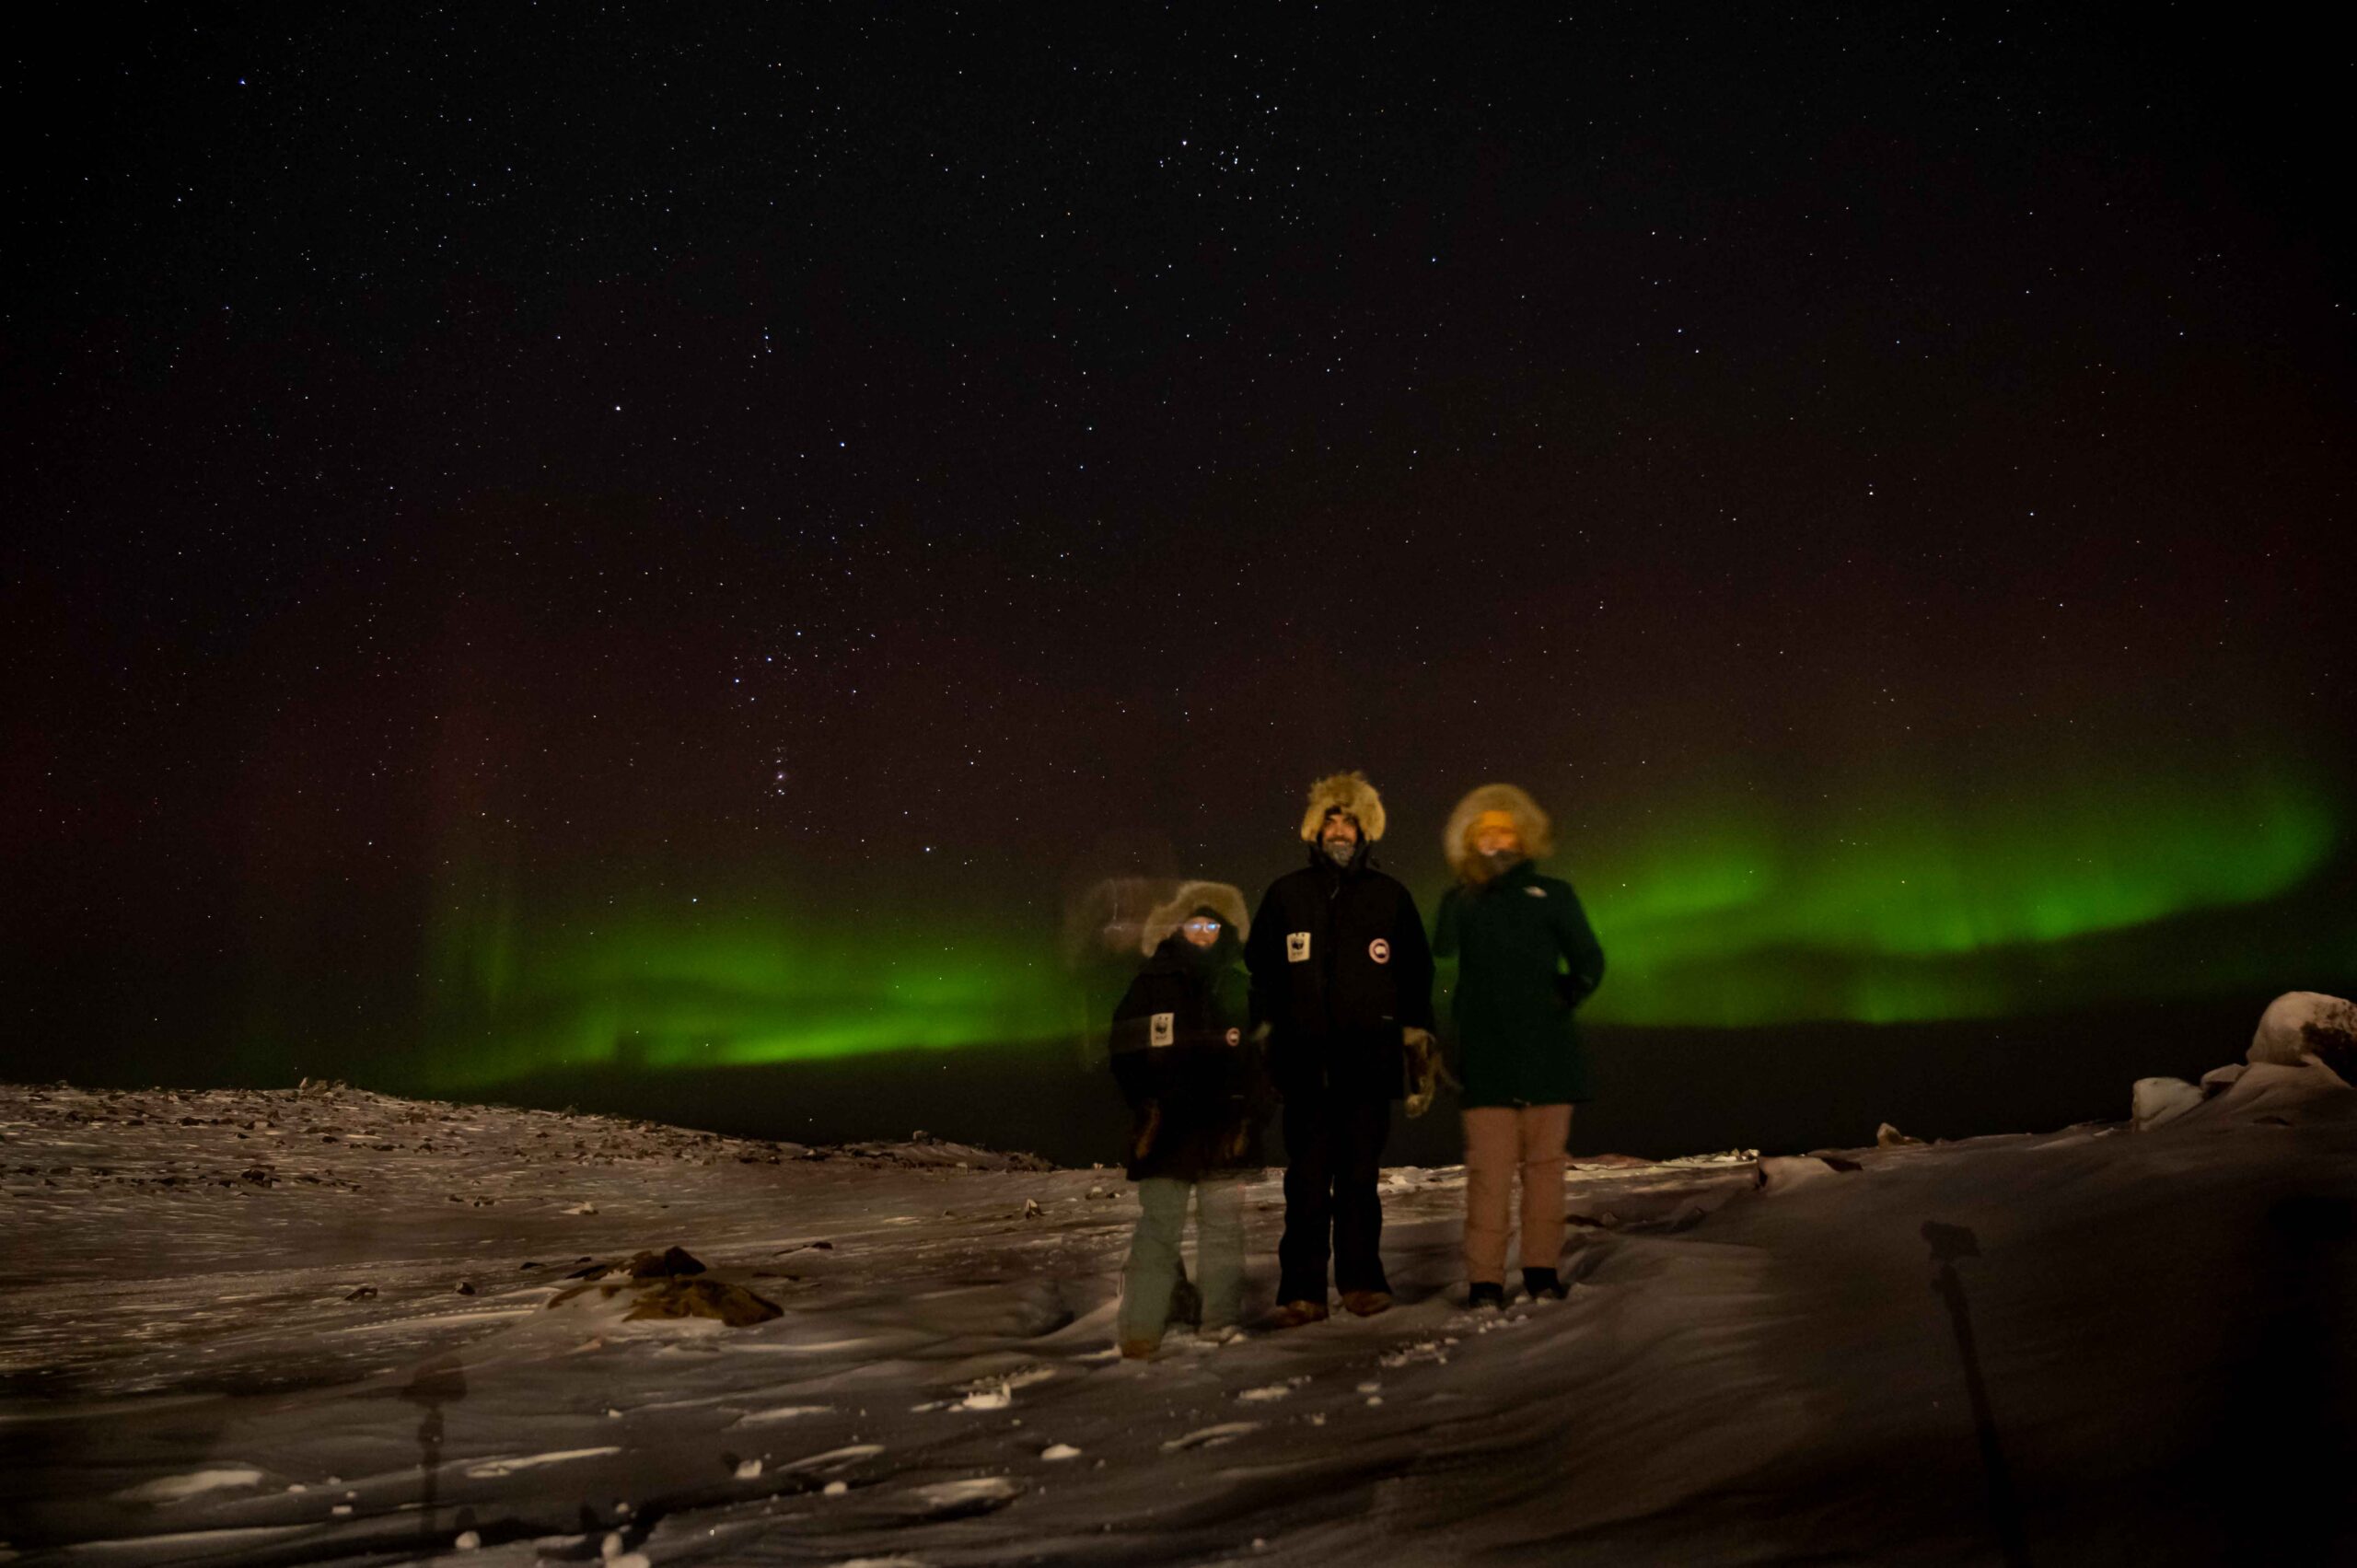 Three people in Arctic gear on the snow in front of a green Aurora Borealis